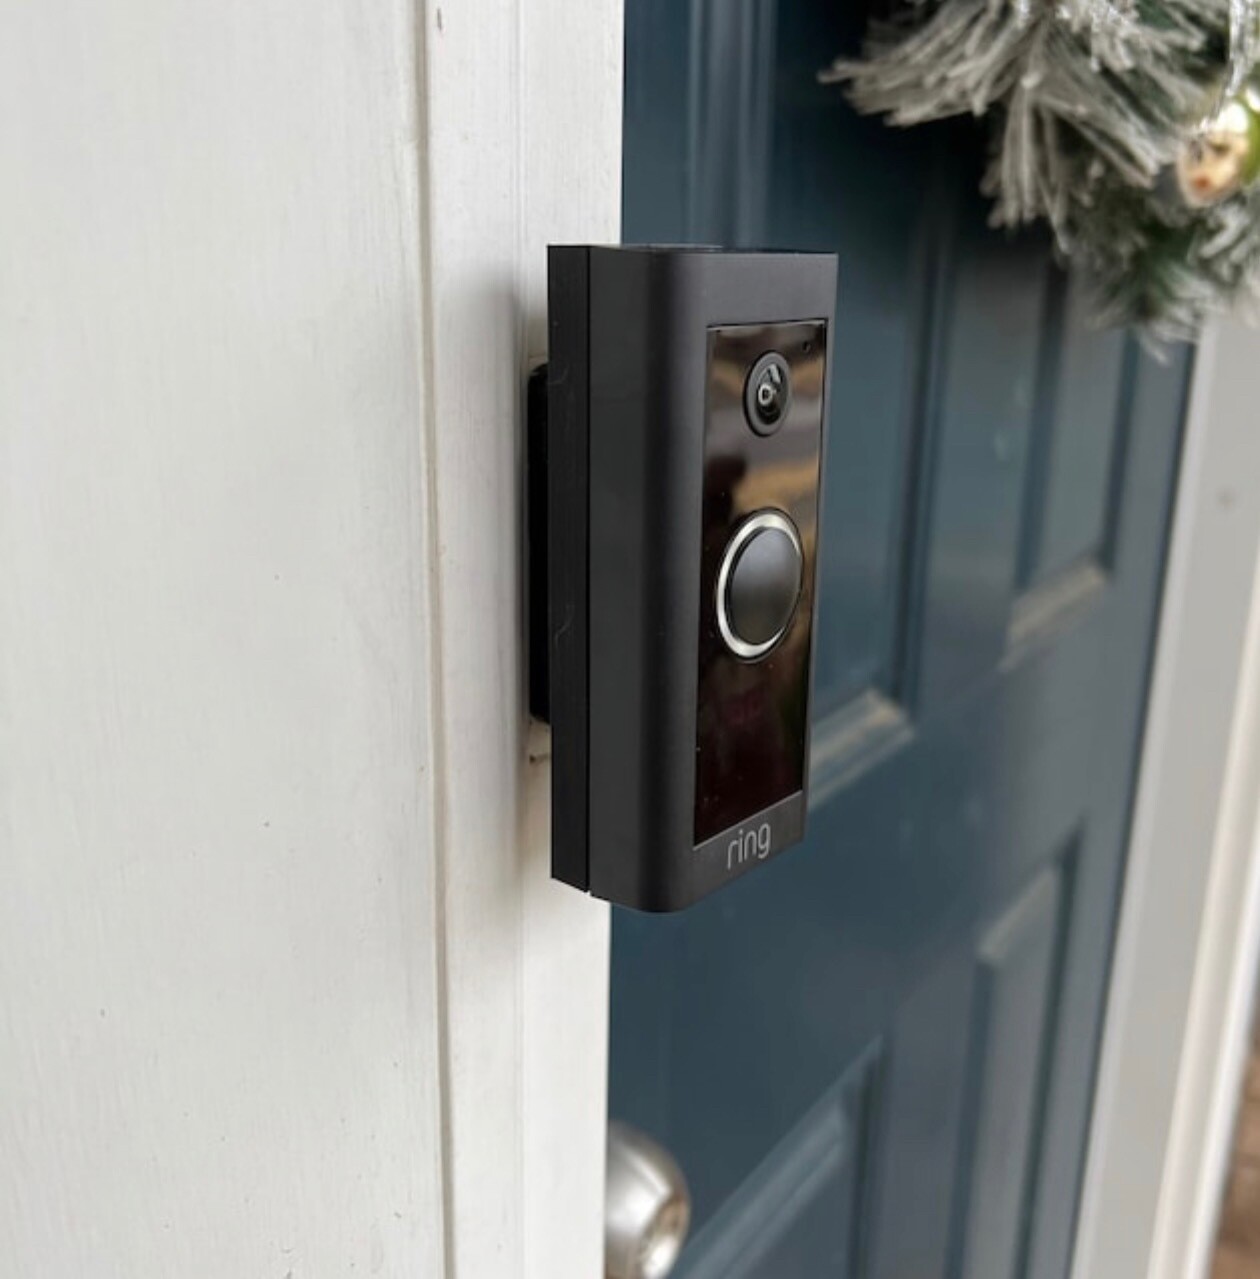 Ring Pro Doorbell Fixed Mount Slim INSTALL ANYWHERE Siding/ Trim- Fits exactly where old doorbell fit.- Angle Adjustment Available NO NEW HOLES